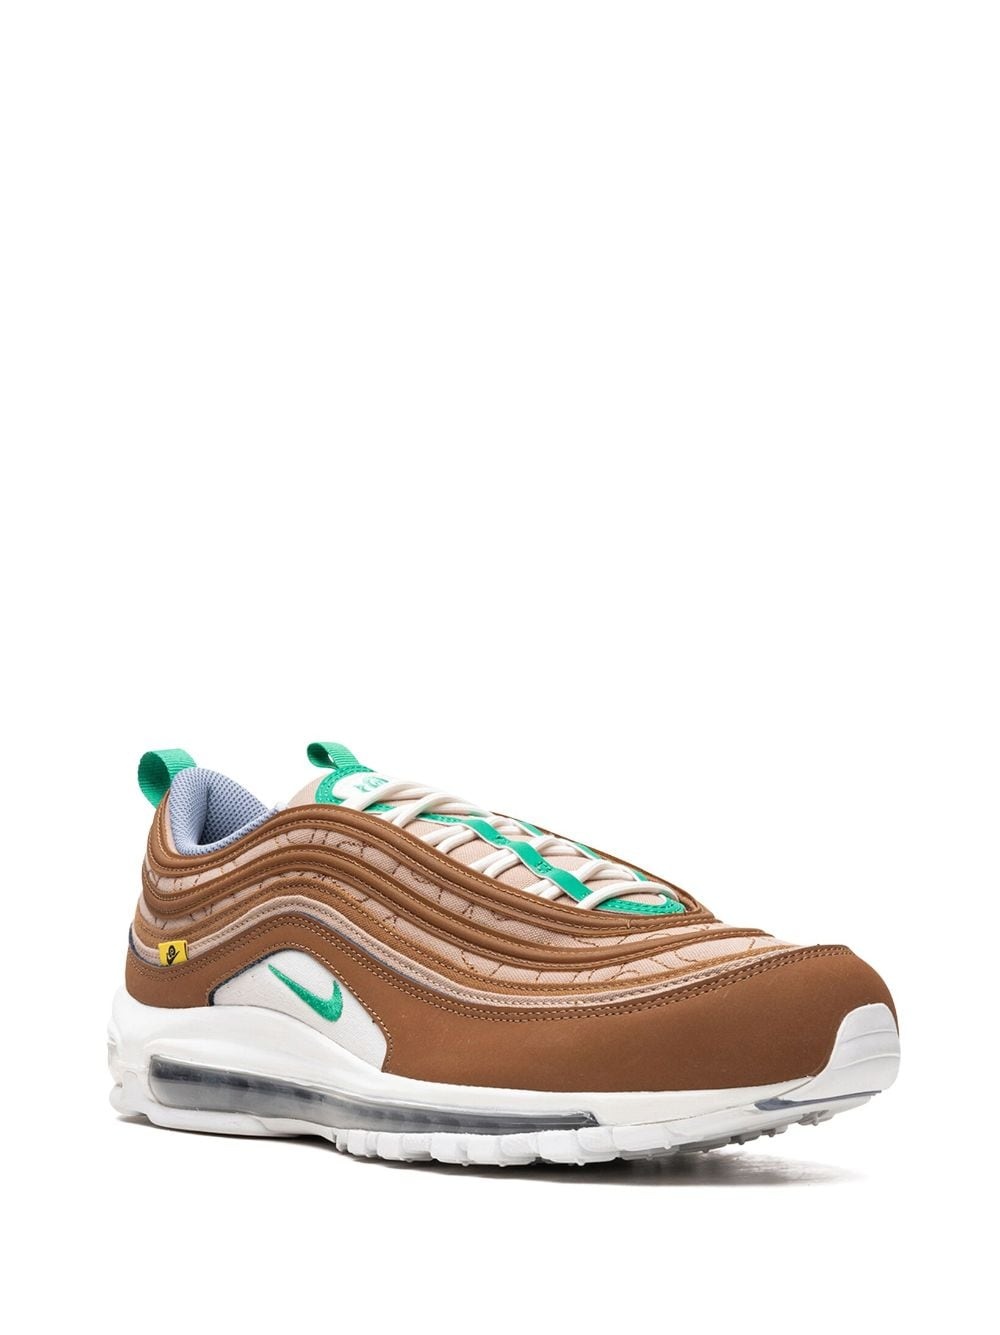 Air Max 97 SE "Moving Company" sneakers - 2